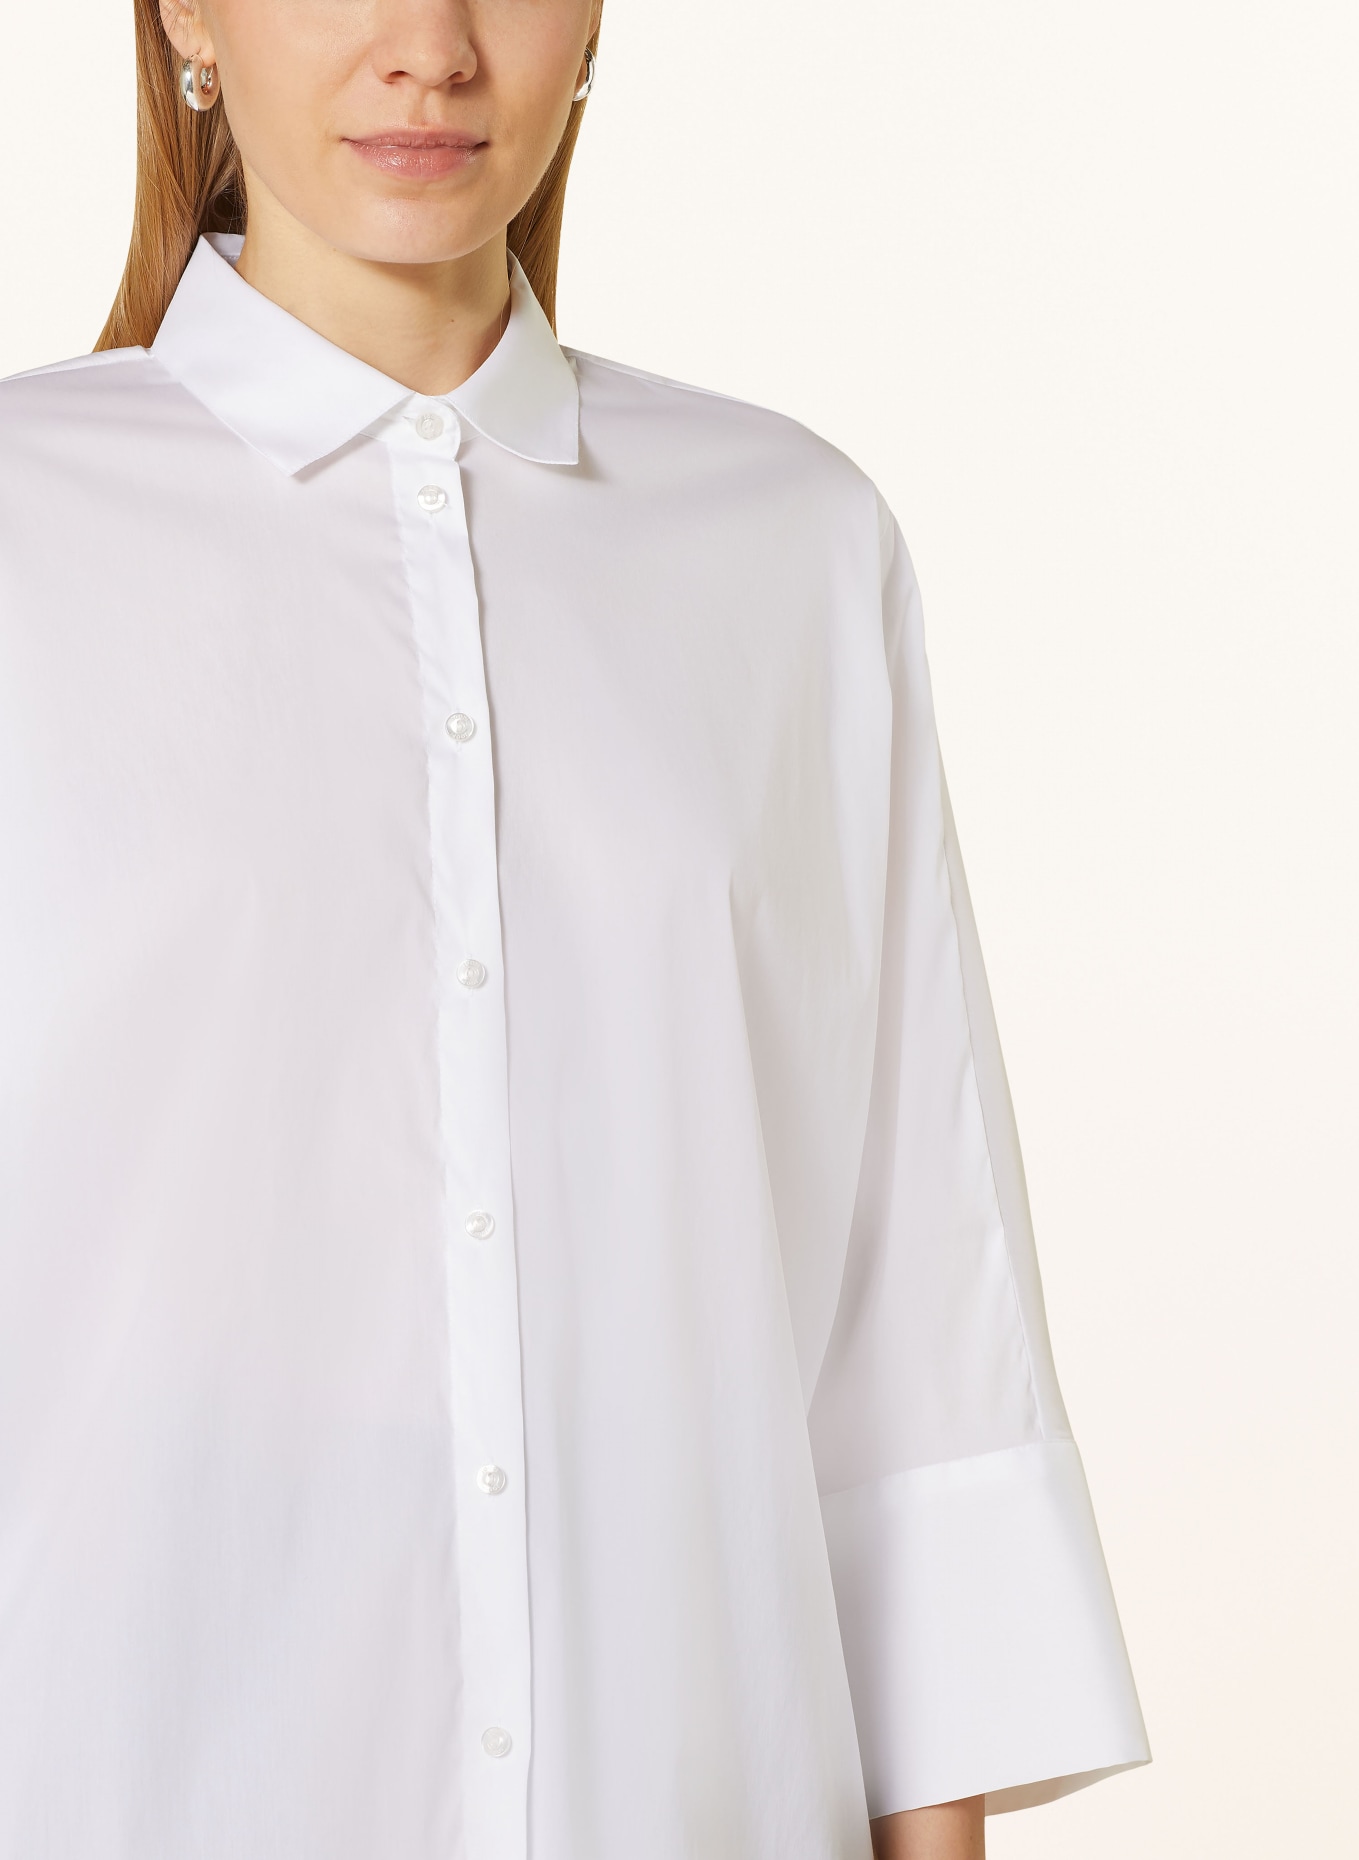 JOOP! Shirt blouse with 3/4 sleeves, Color: WHITE (Image 4)